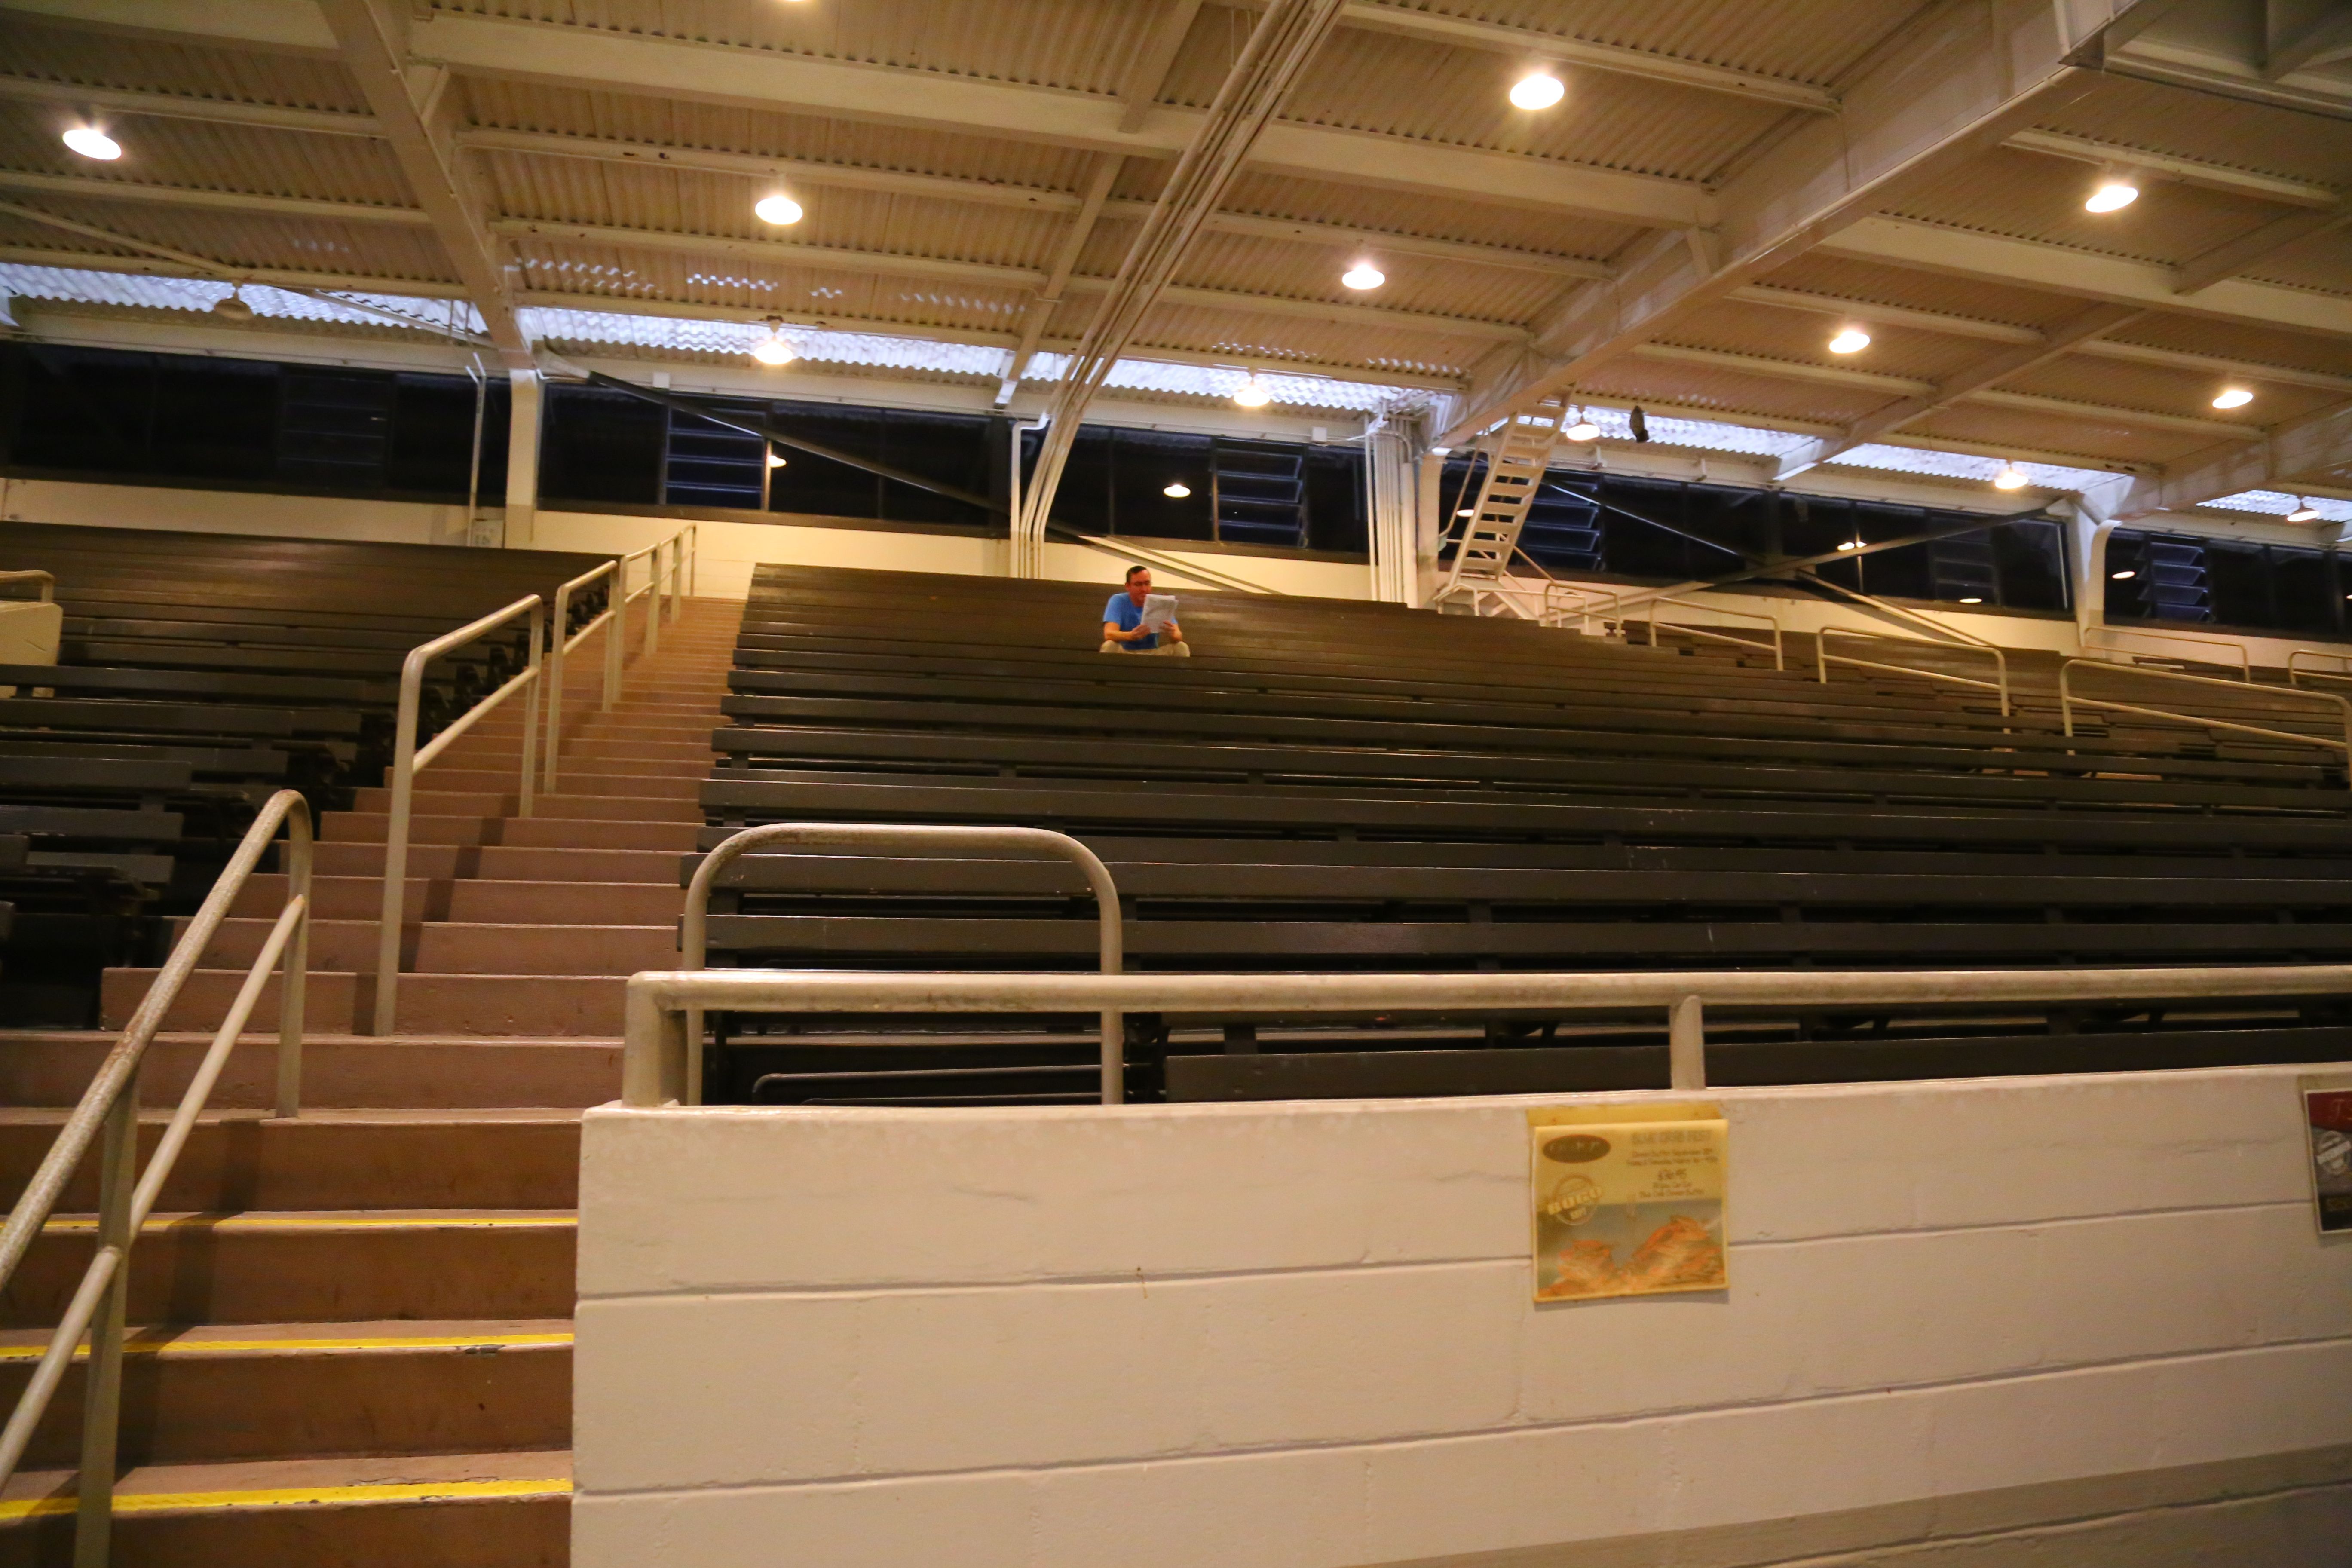 The writer sitting in the mostly empty grandstand reading the program, August 2019